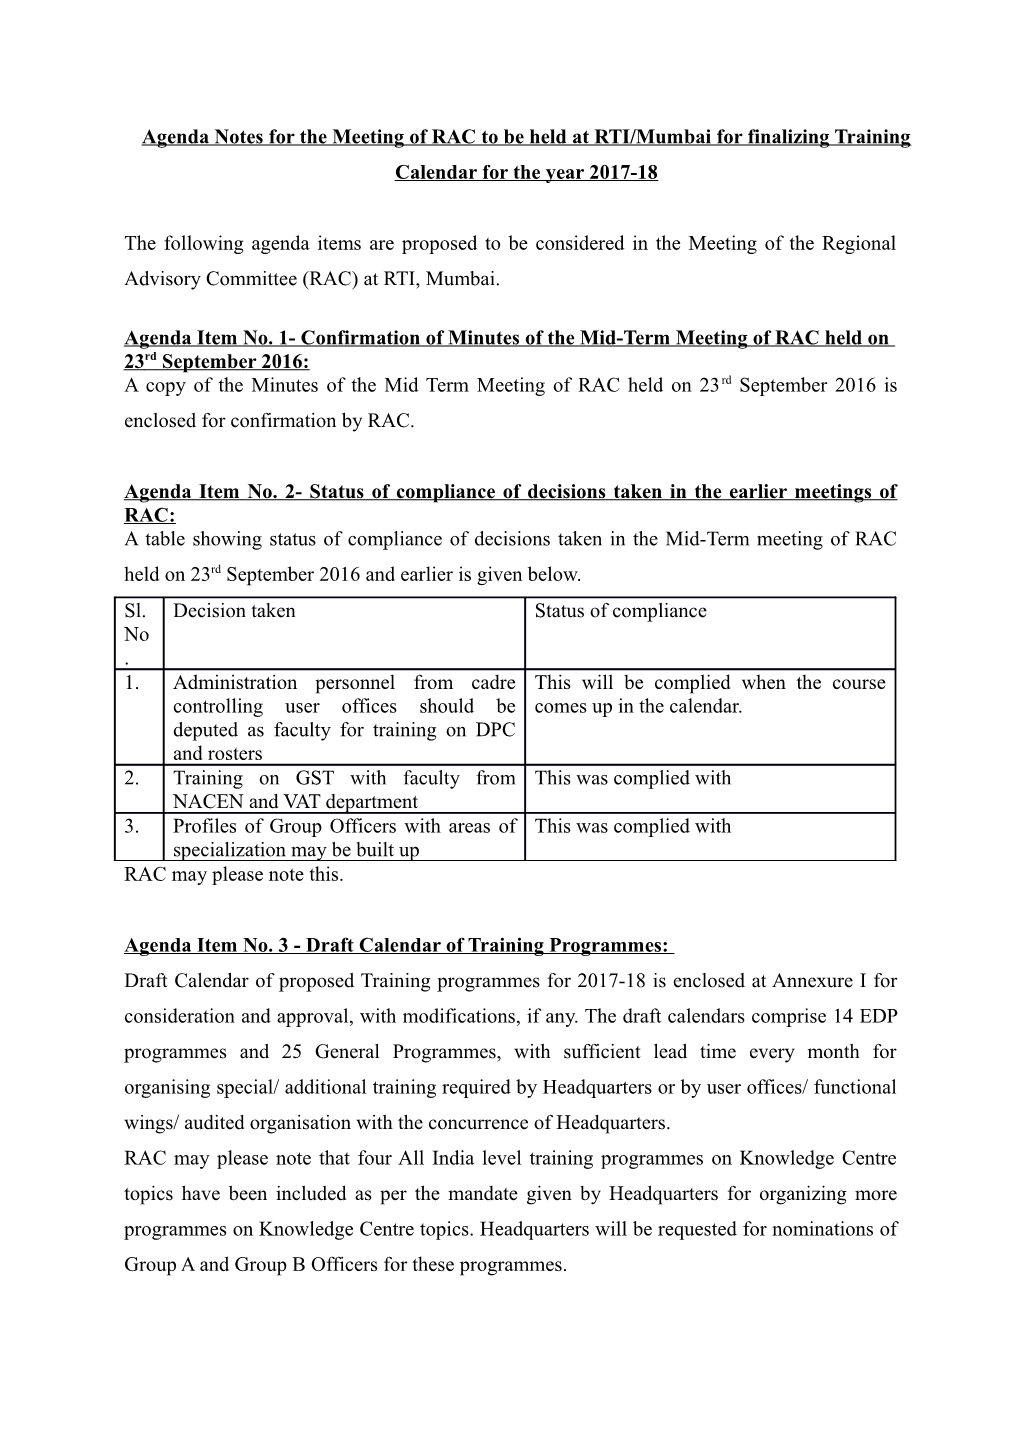 Agenda Notes for the Meeting of RAC to Be Held at RTI/Mumbai for Finalizing Training Calendar